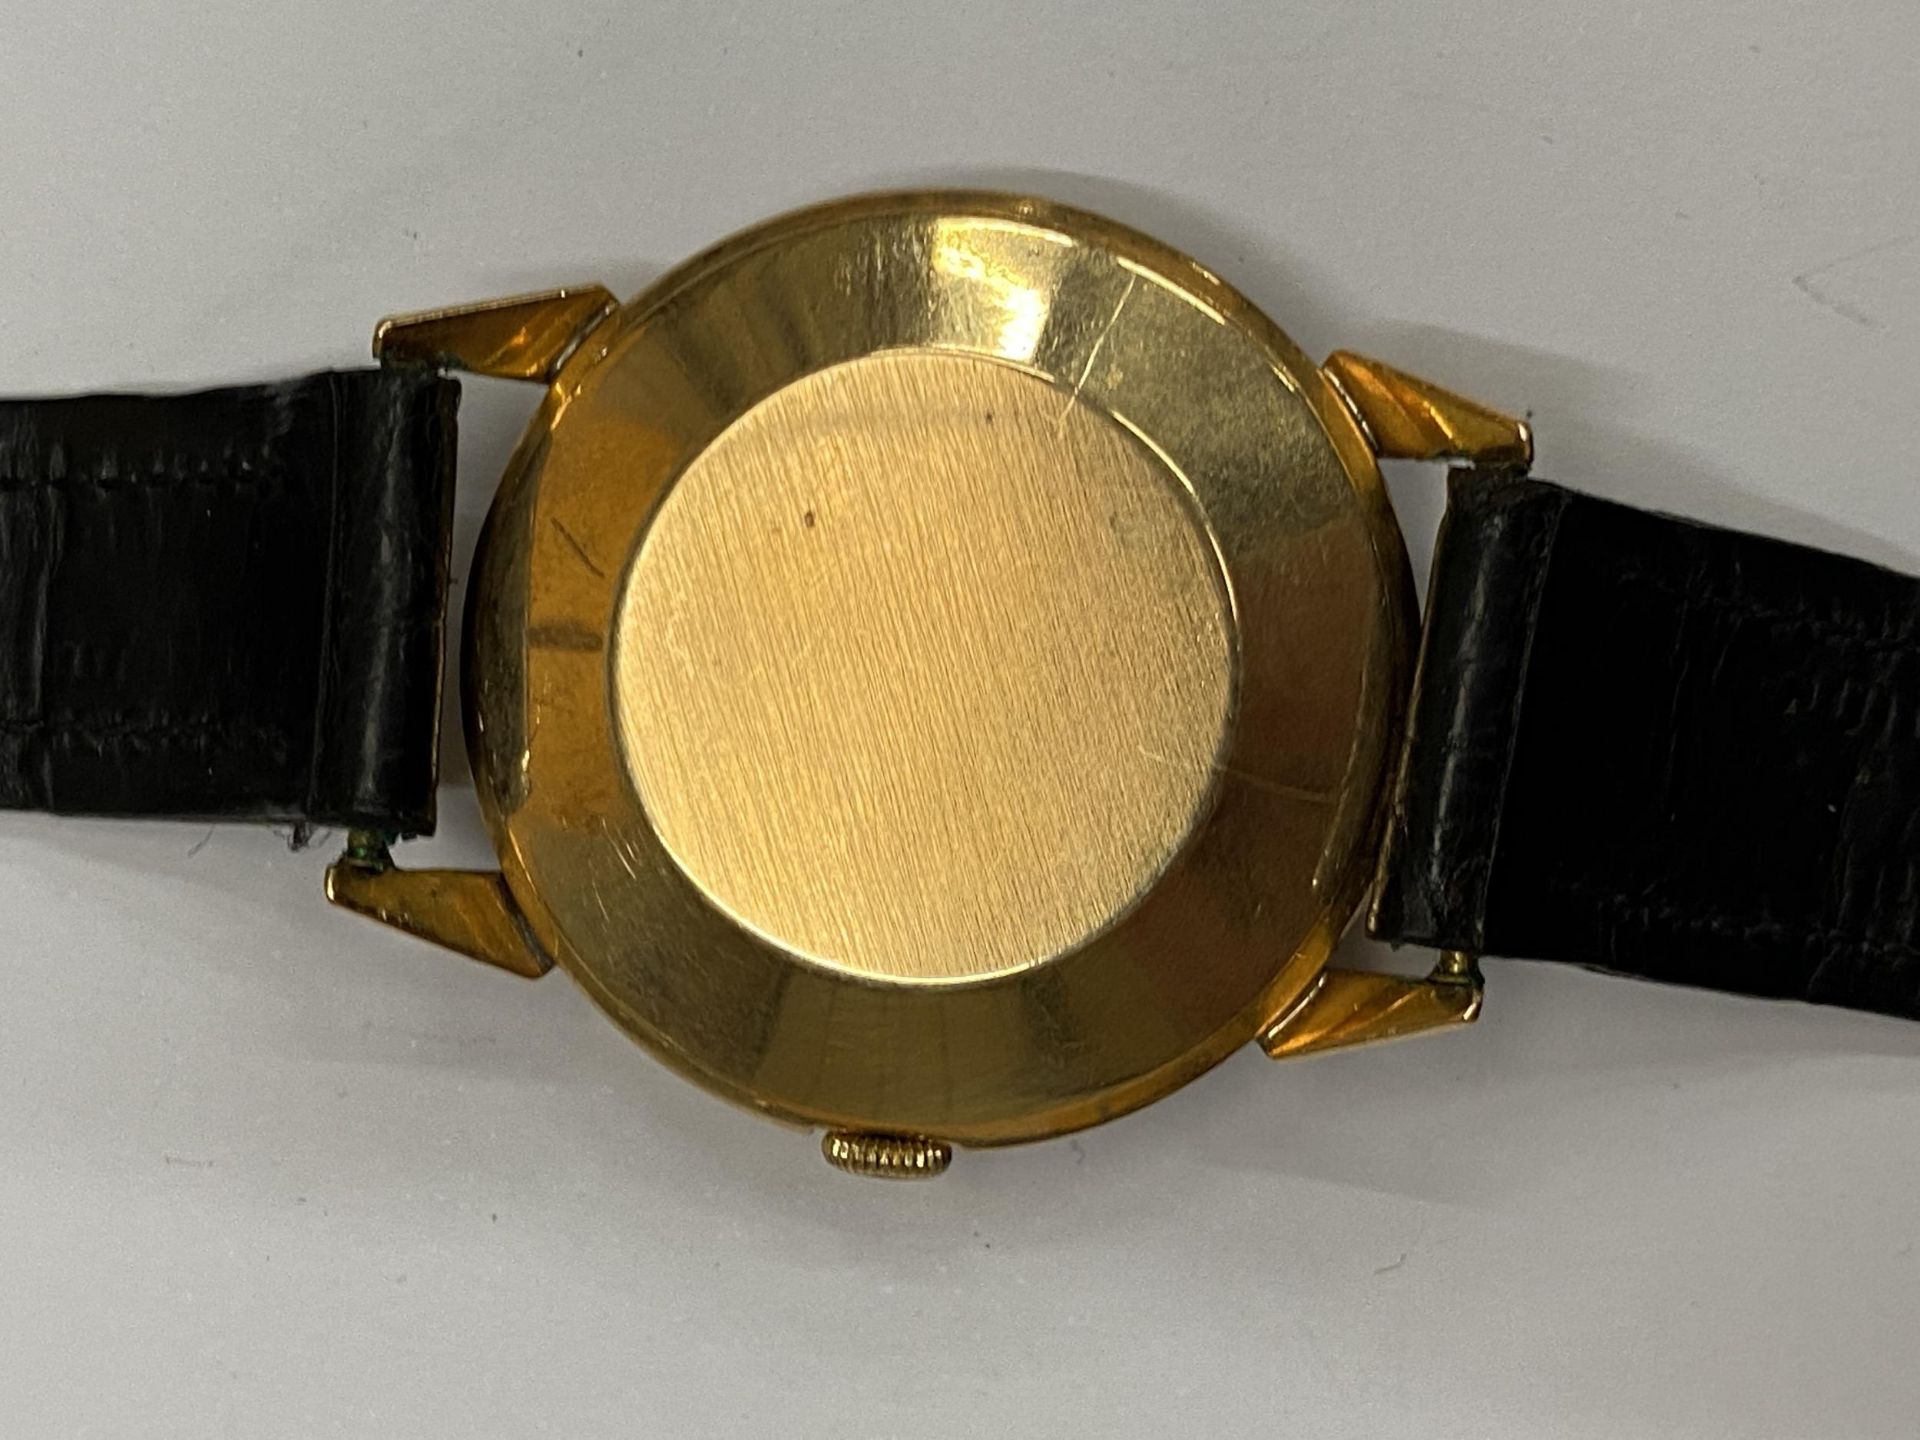 A 1940'S OMEGA BUMPER AUTOMATIC WATCH, YELLOW METAL UNMARKED CASE, WITH NON ORIGINAL BOX, WORKING AT - Image 5 of 8